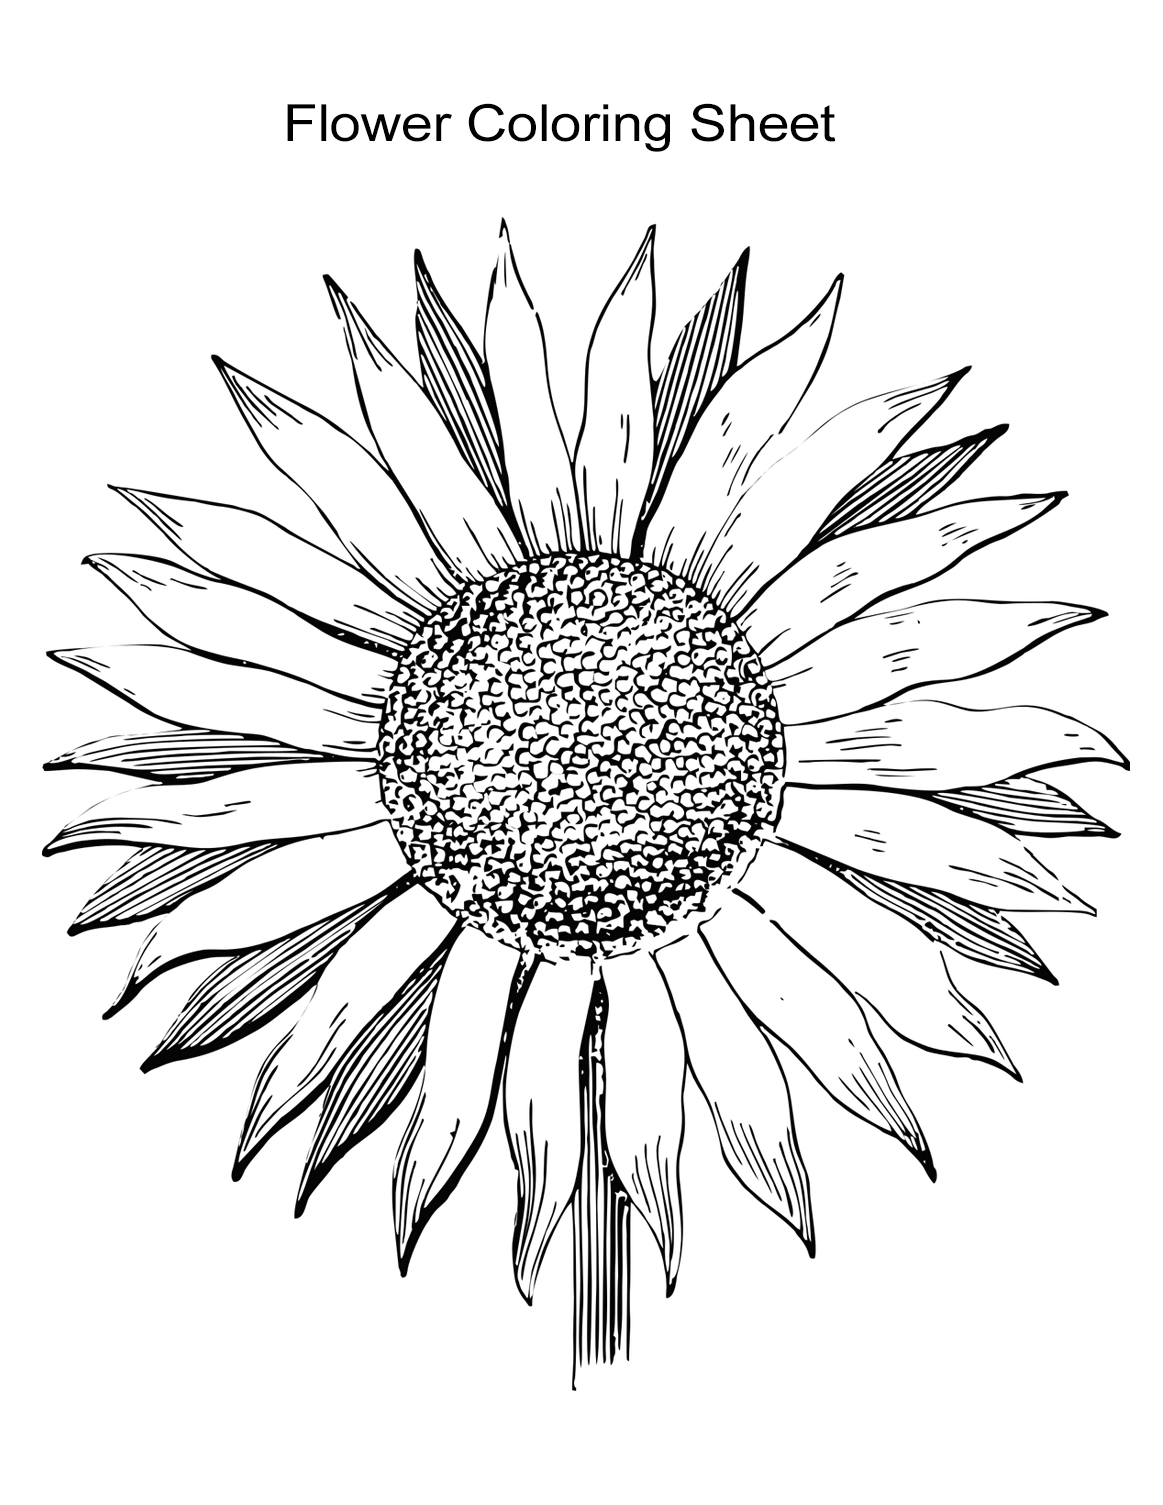 coloring pages for adults to print flowers 10 flower coloring sheets for girls and boys all esl print coloring flowers adults for pages to 